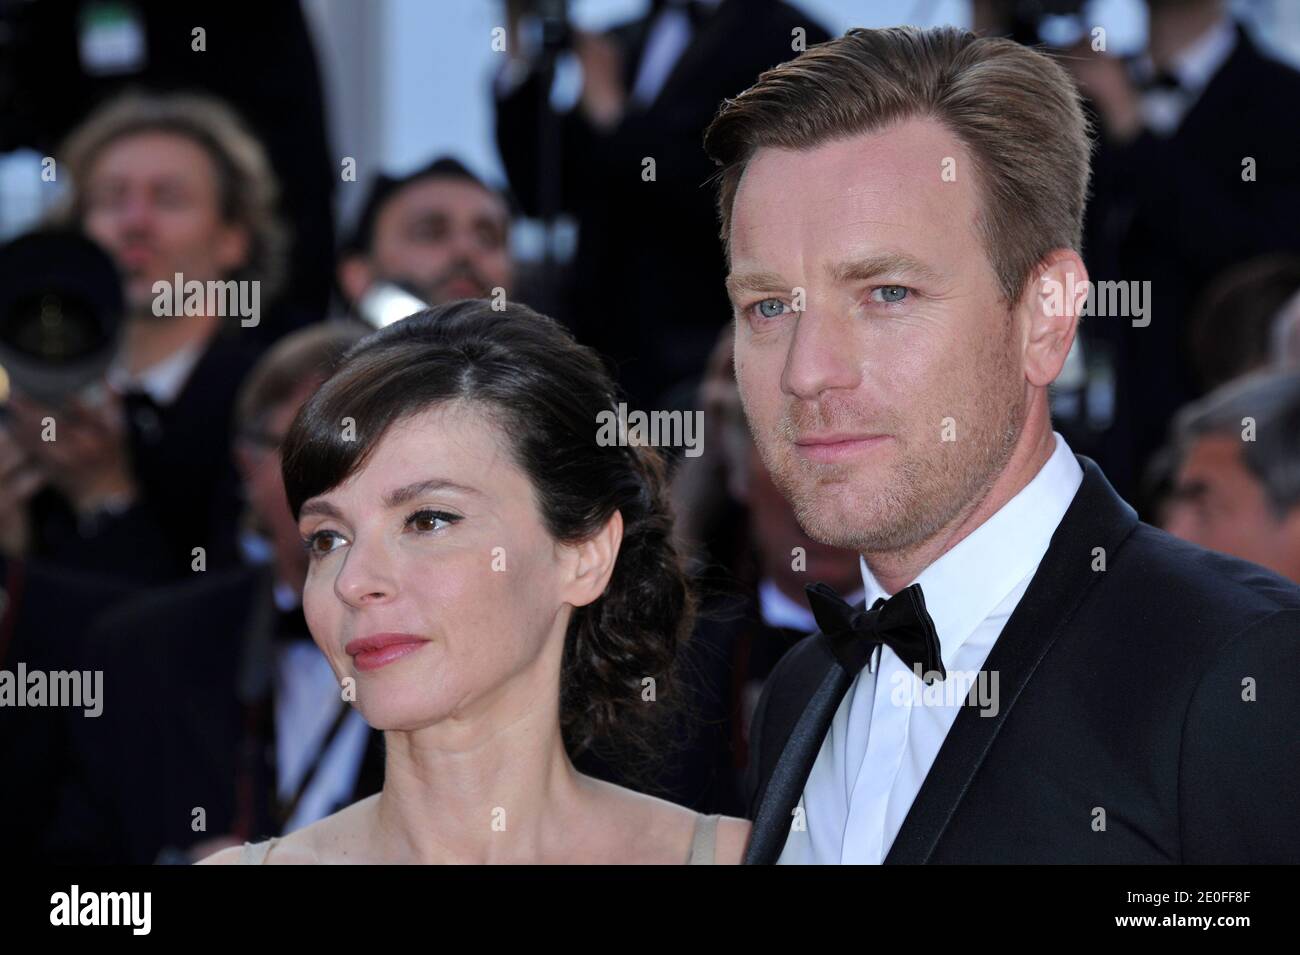 Member of the jury and actor Ewan Mc Gregor with Eve Mavraki arriving at the 'On the road' premiere held at the Palais Des Festivals in Cannes, southern France, on May 23, 2012, as part of the 65th Cannes Film Festival. Photo by Aurore Marechal/ABACAPRESS.COM Stock Photo